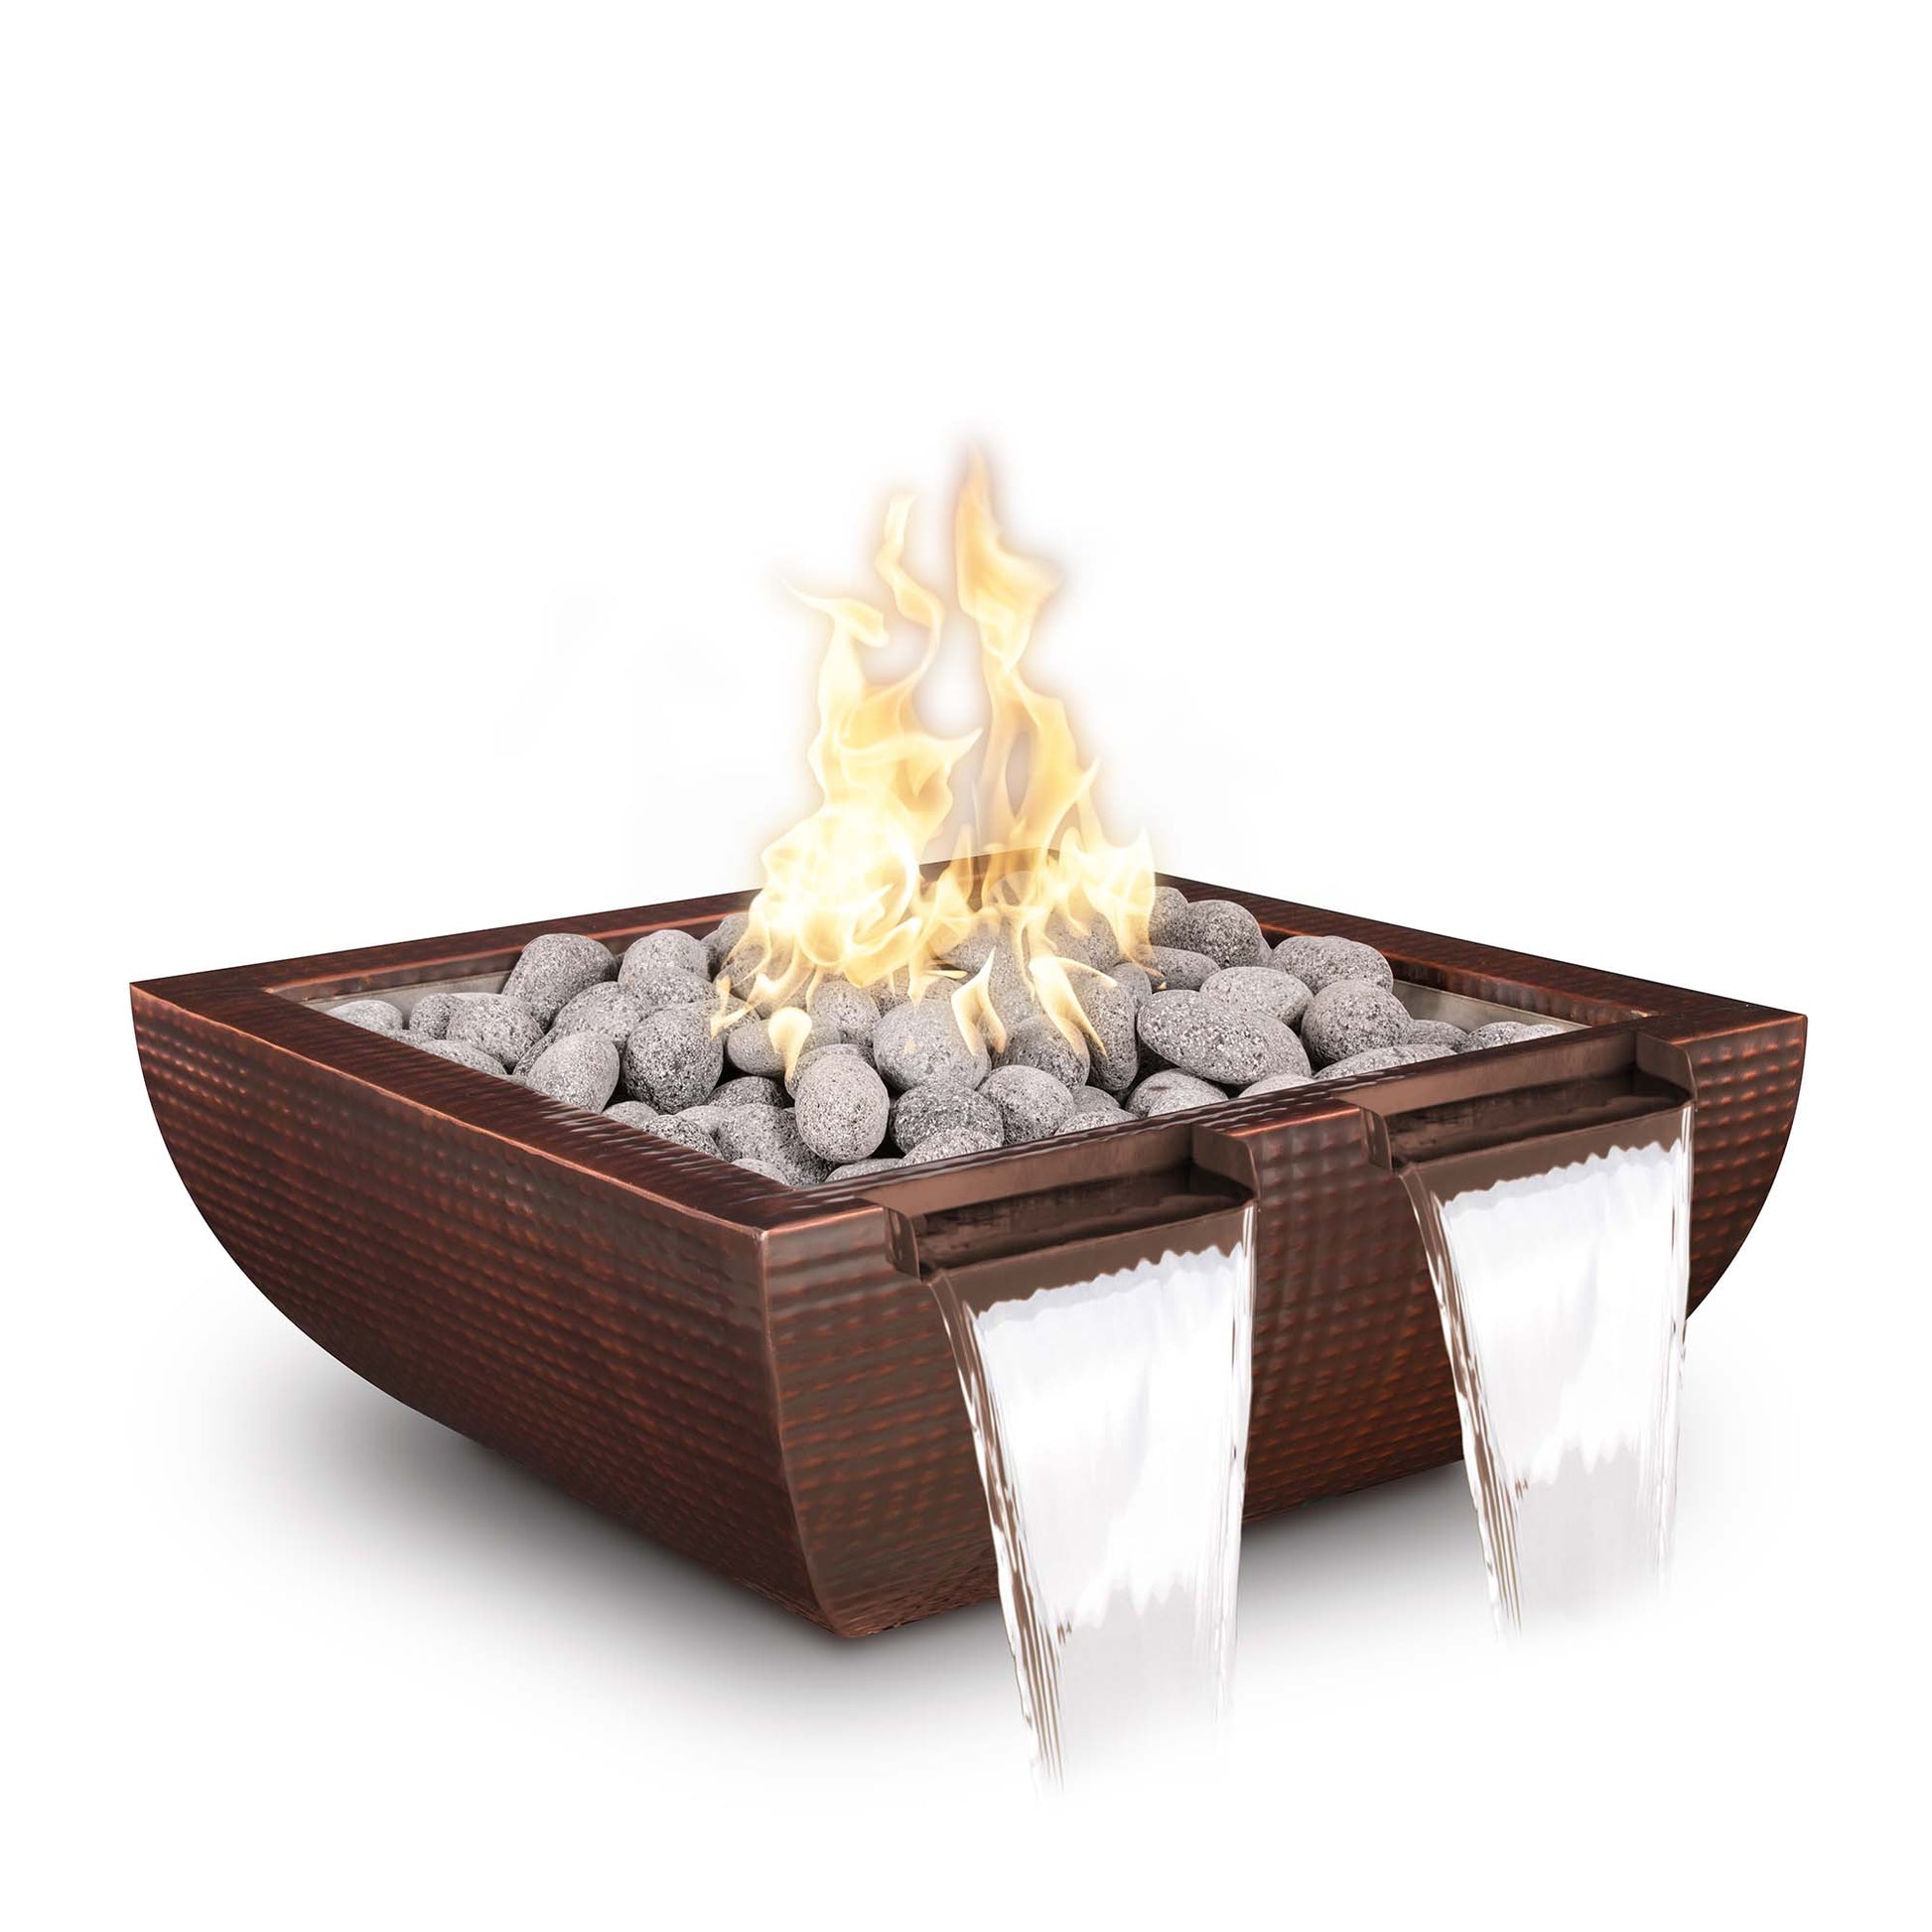 The Outdoor Plus Avalon Twin Spill 24" White Powder Coated Metal Natural Gas Fire & Water Bowl with Match Lit with Flame Sense Ignition